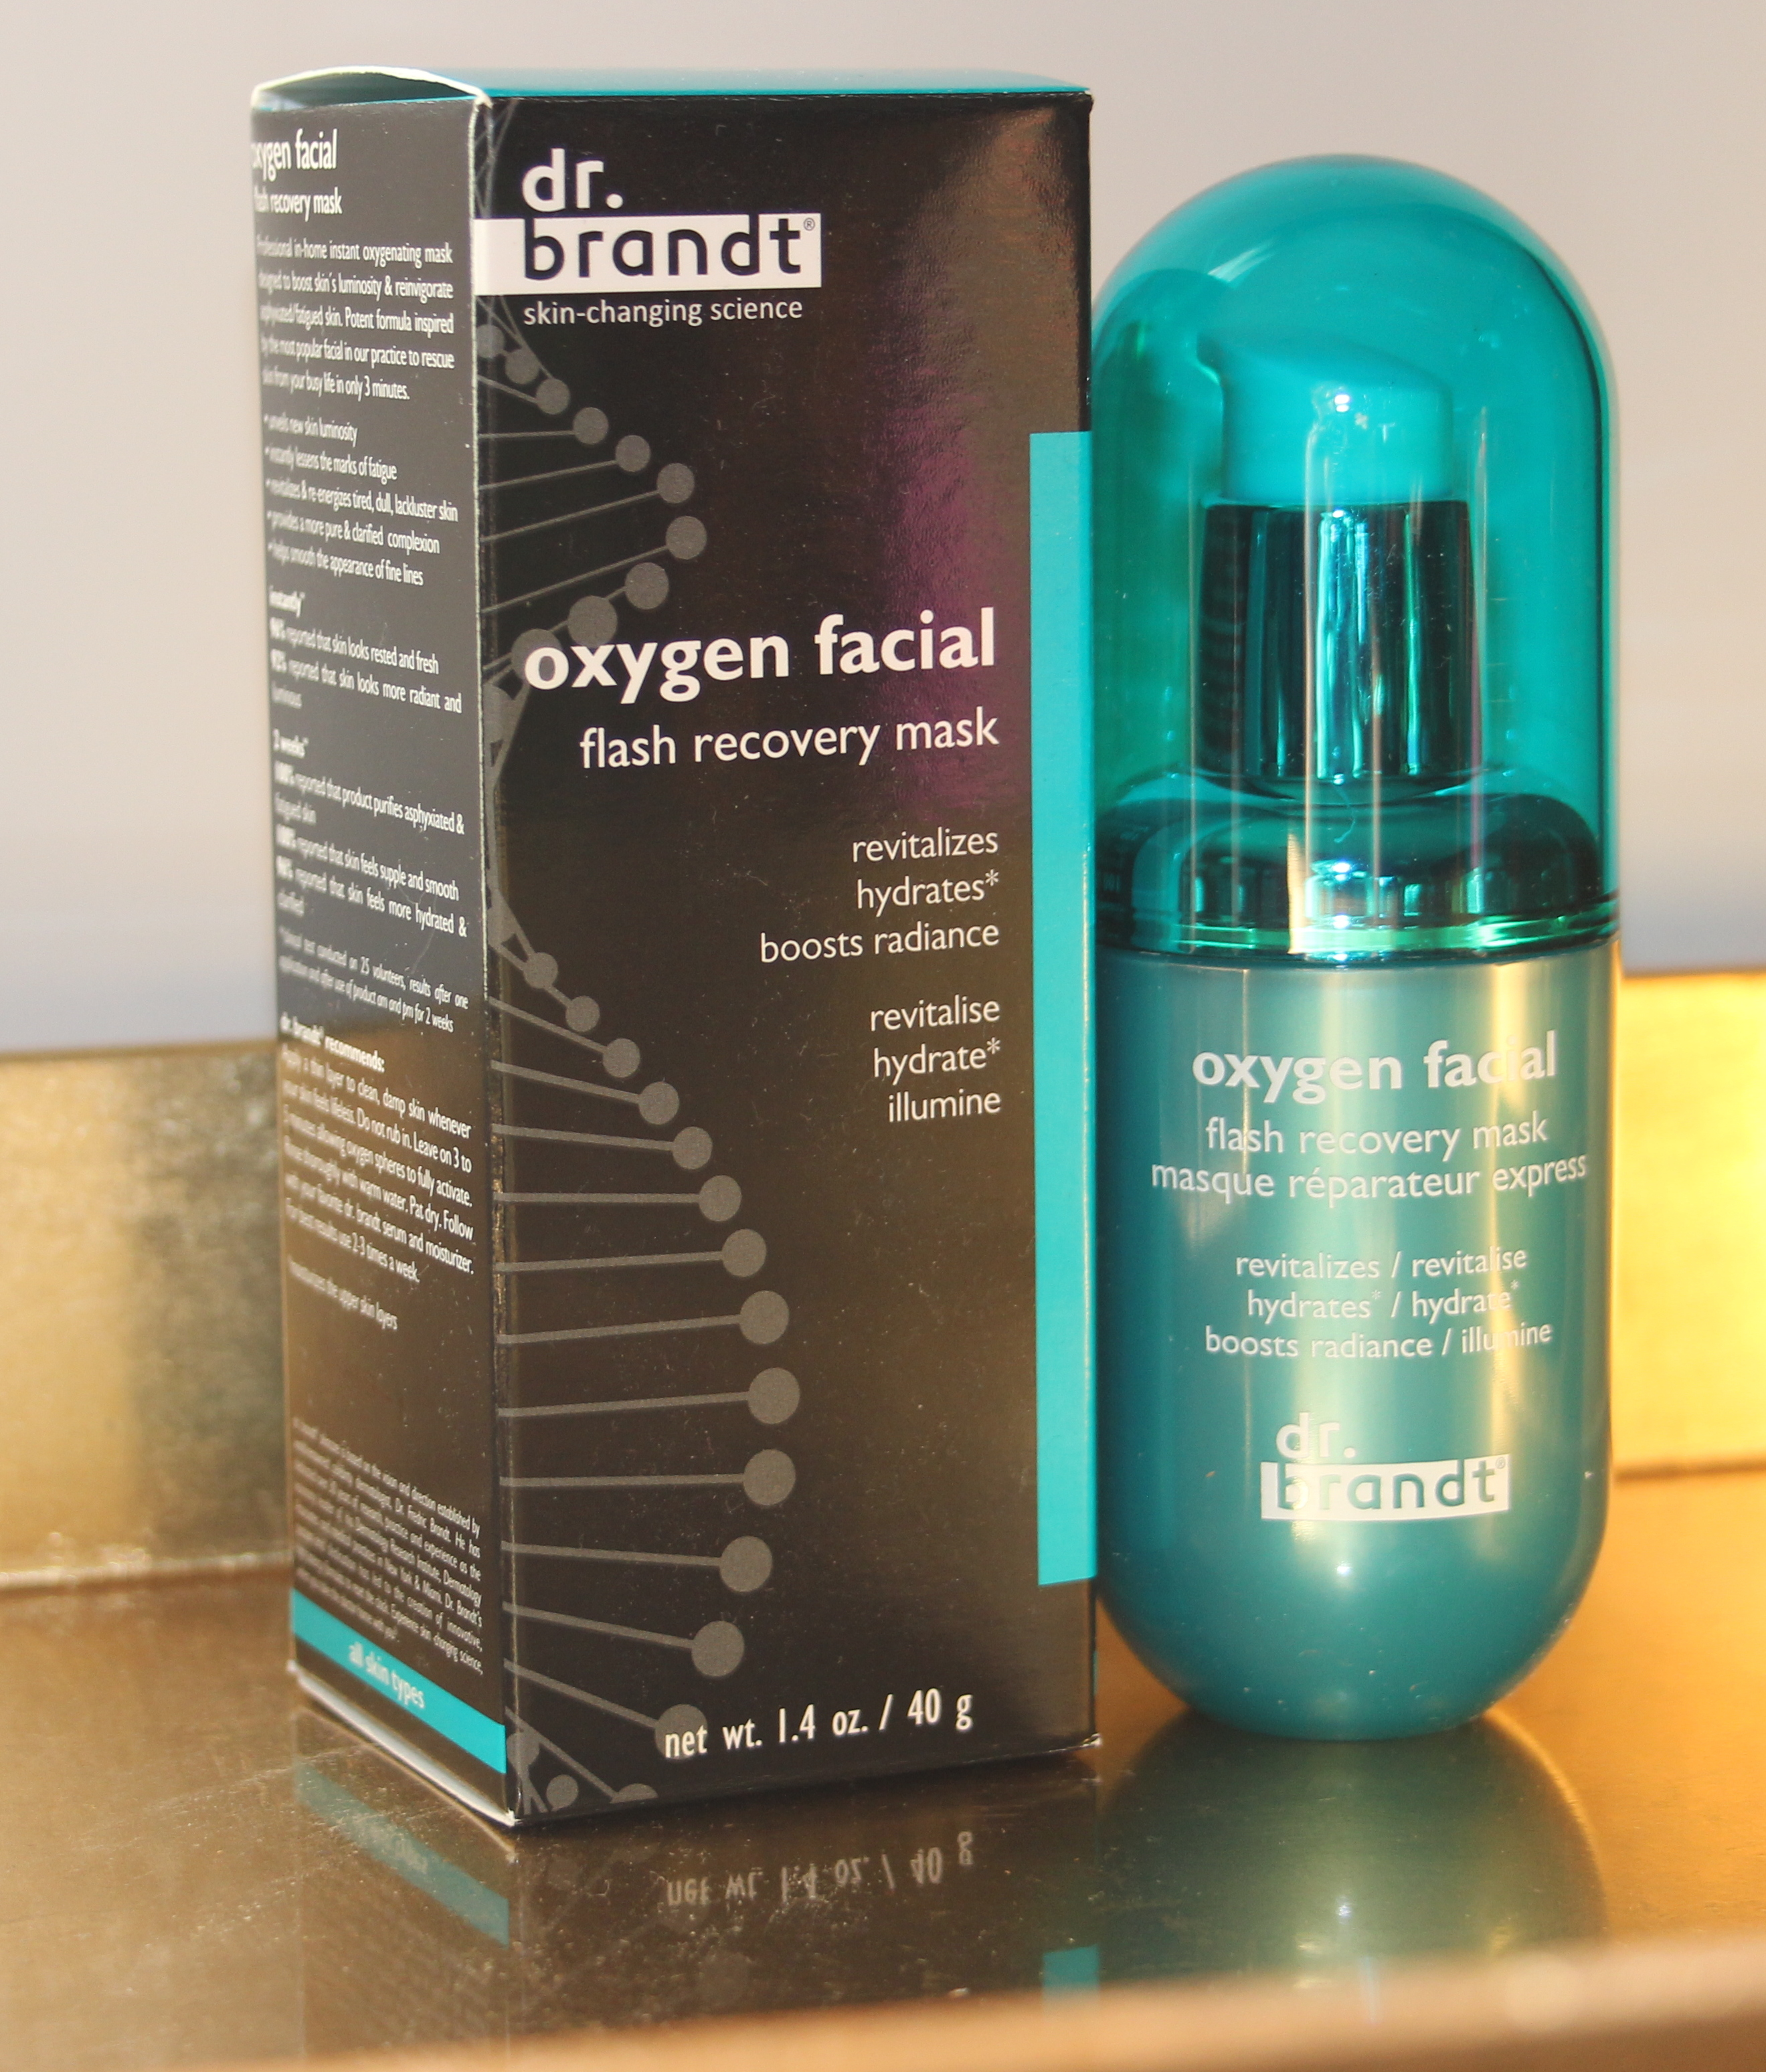 dr. brandt Oxygen Facial Flash Recovery Mask